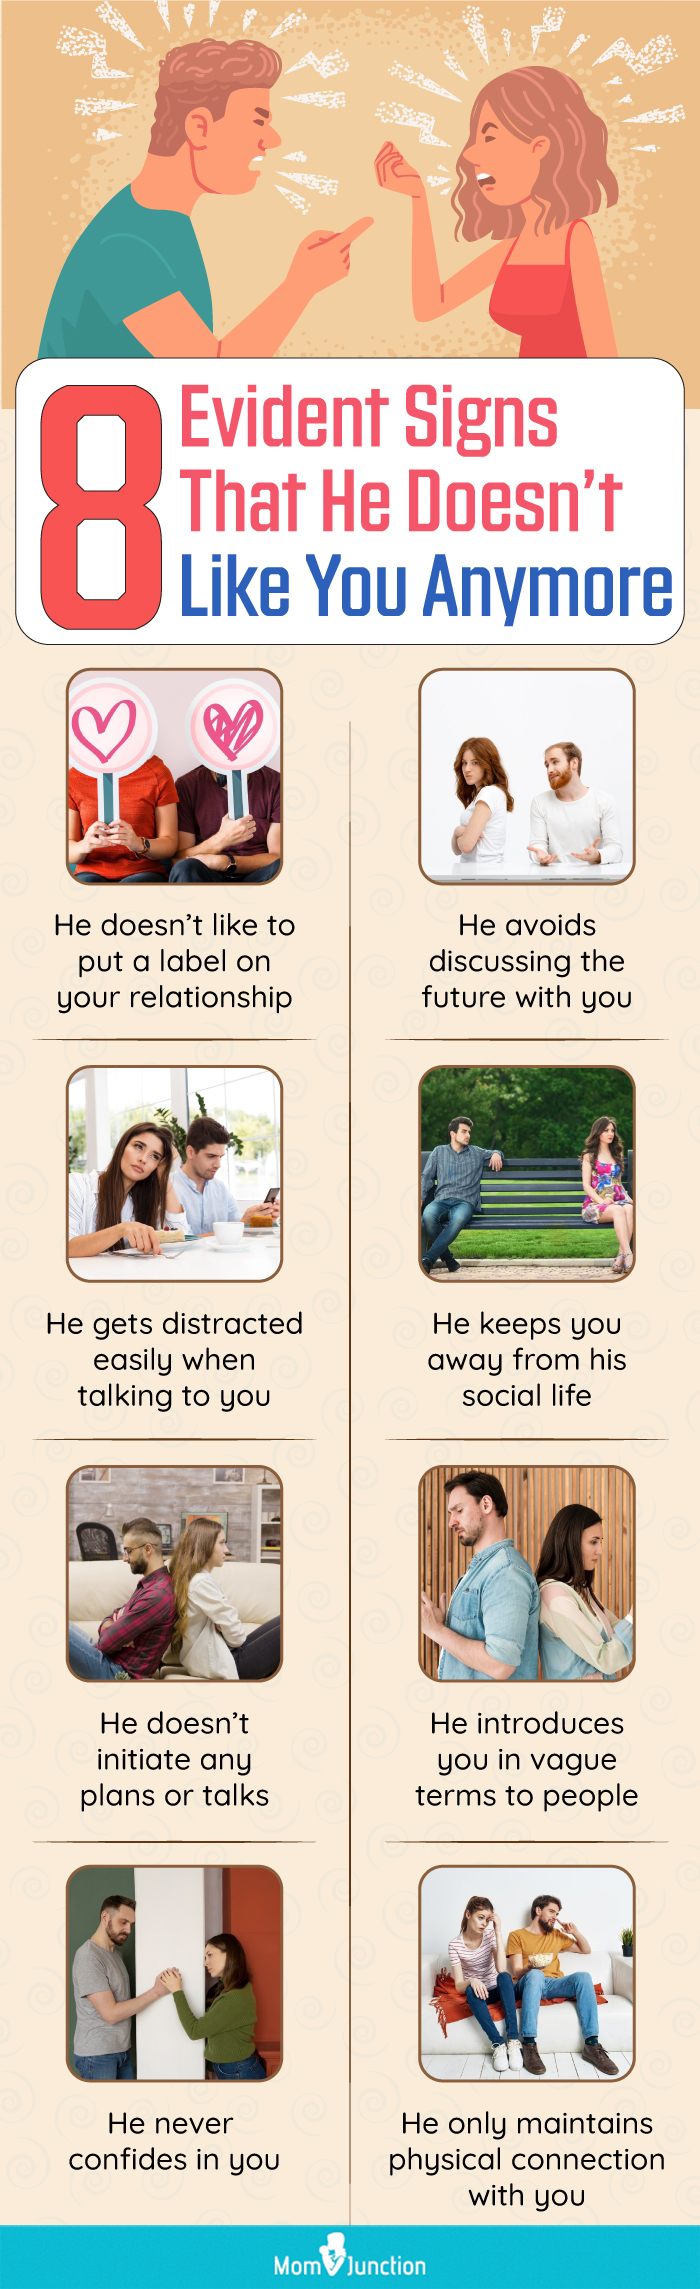 evident signs that he doesnt like you anymore (infographic)